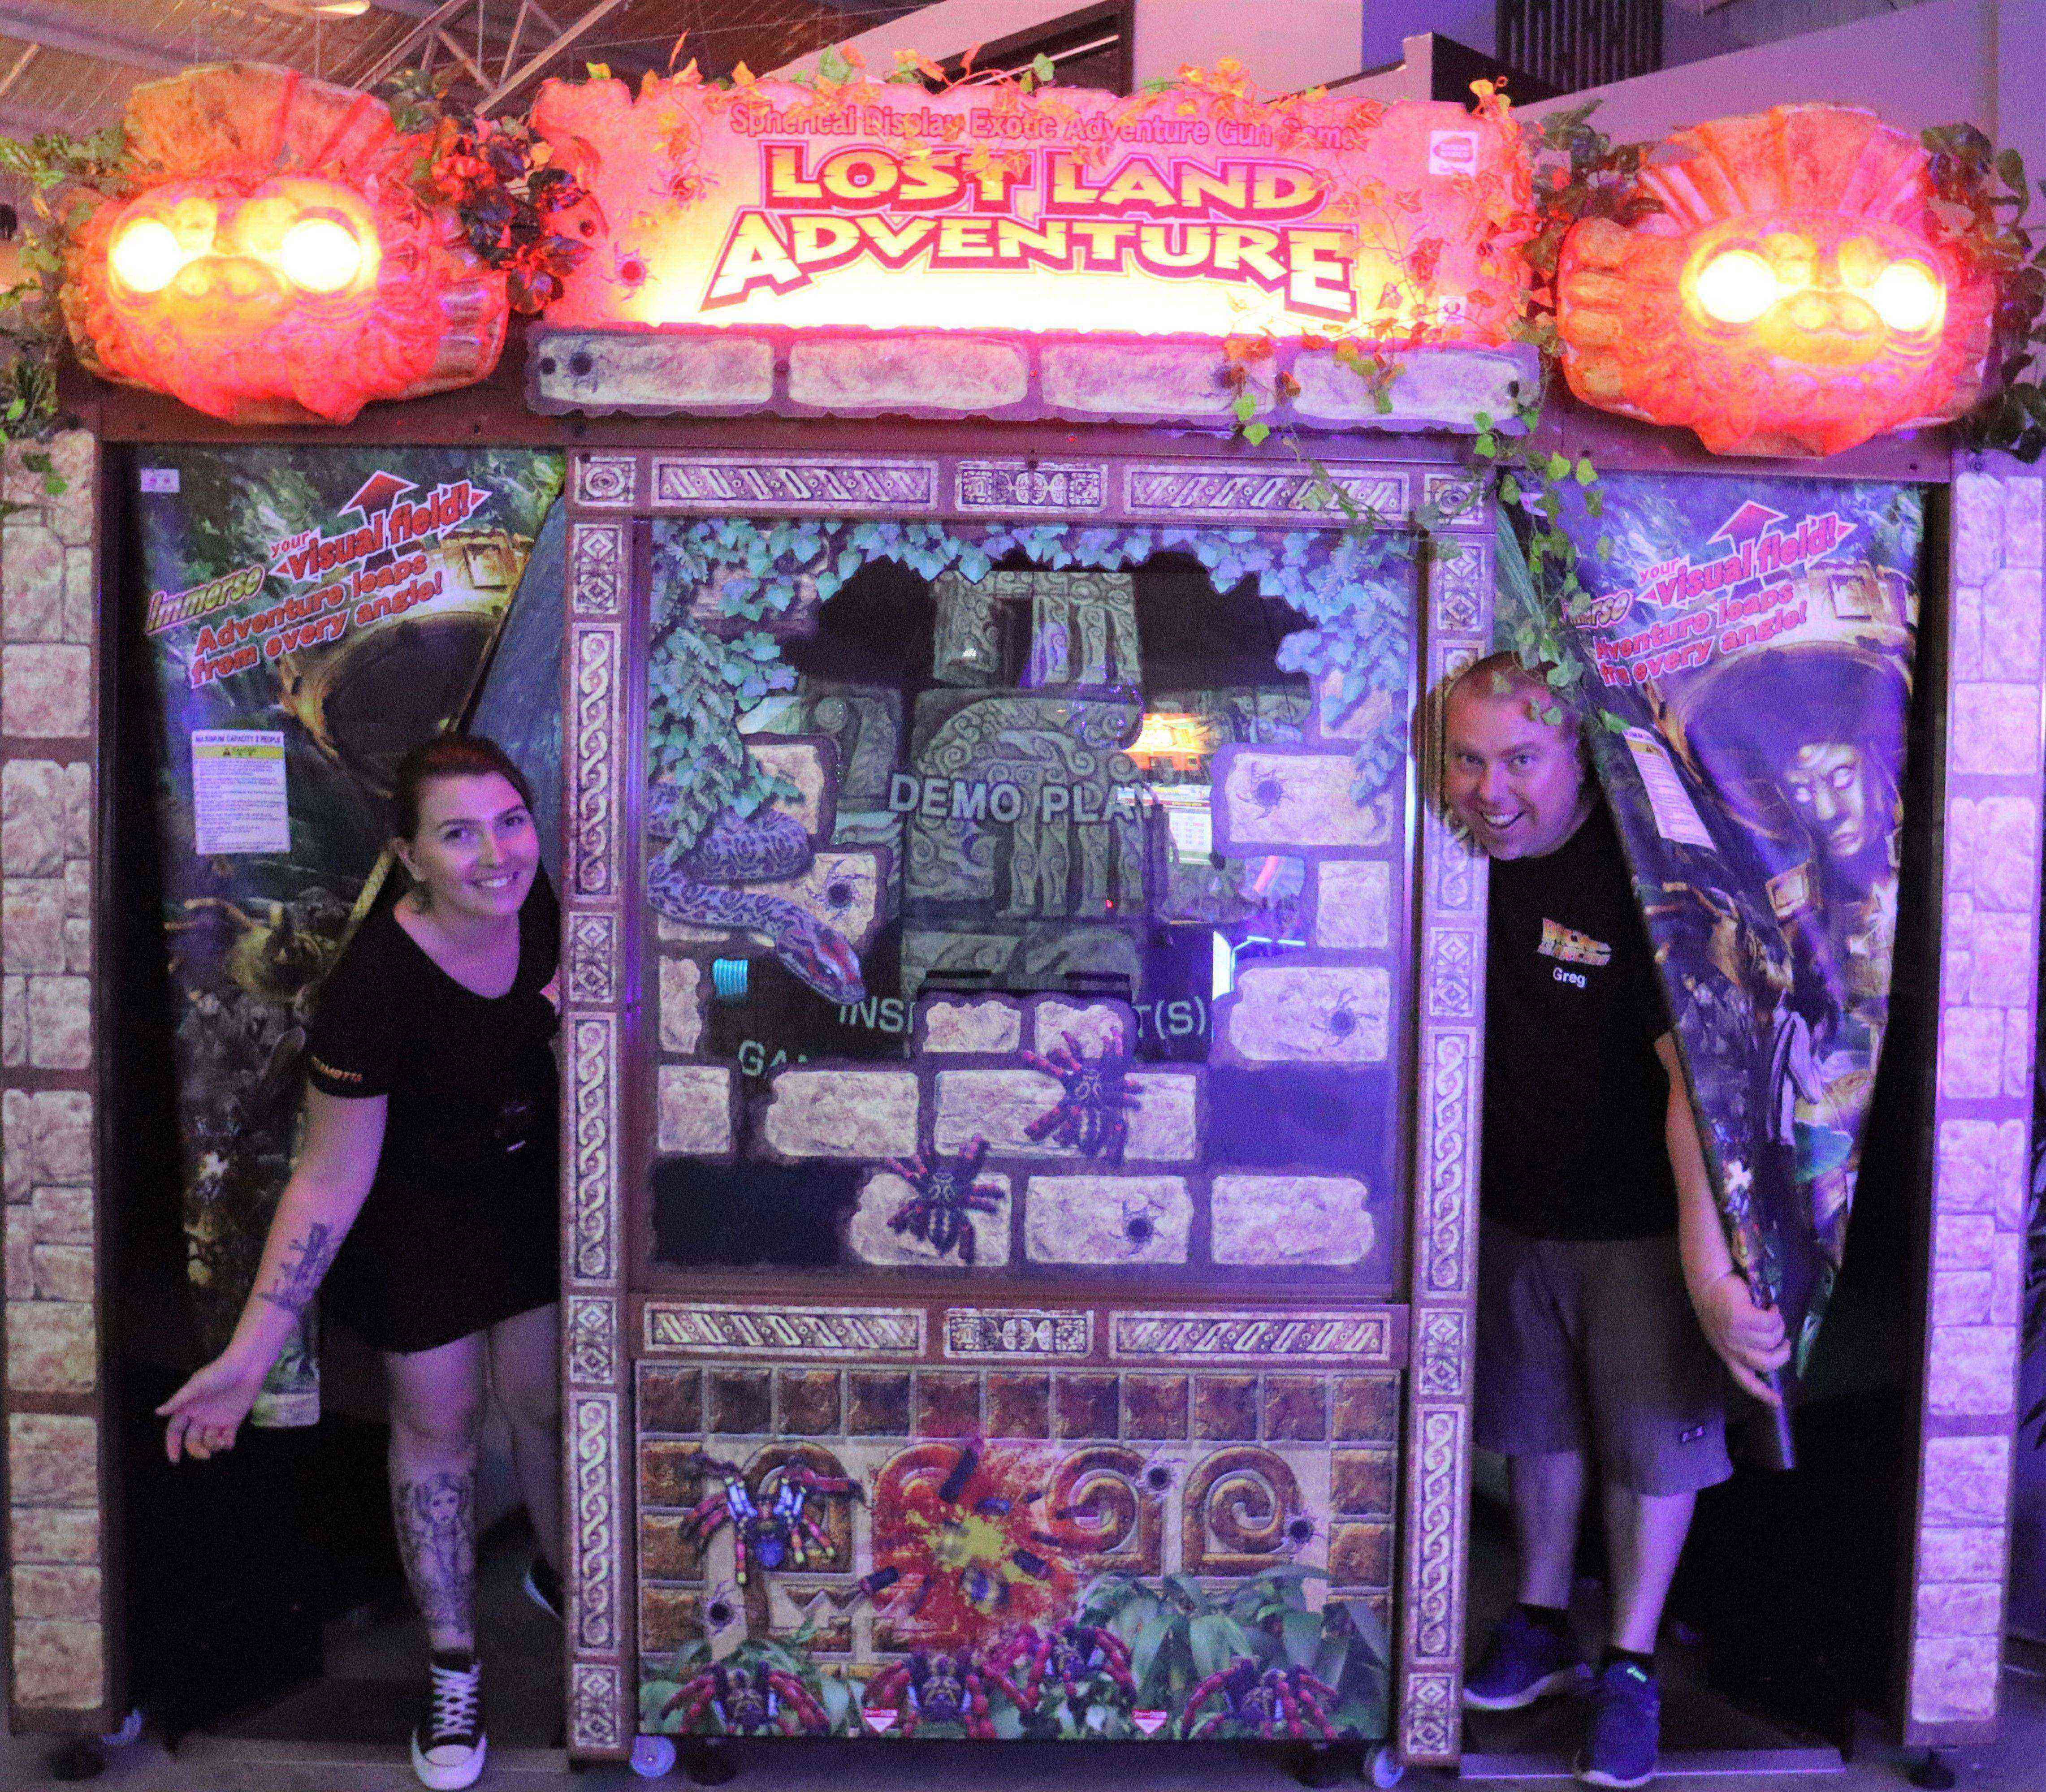 Back to the future for arcade game lovers in southern NSW